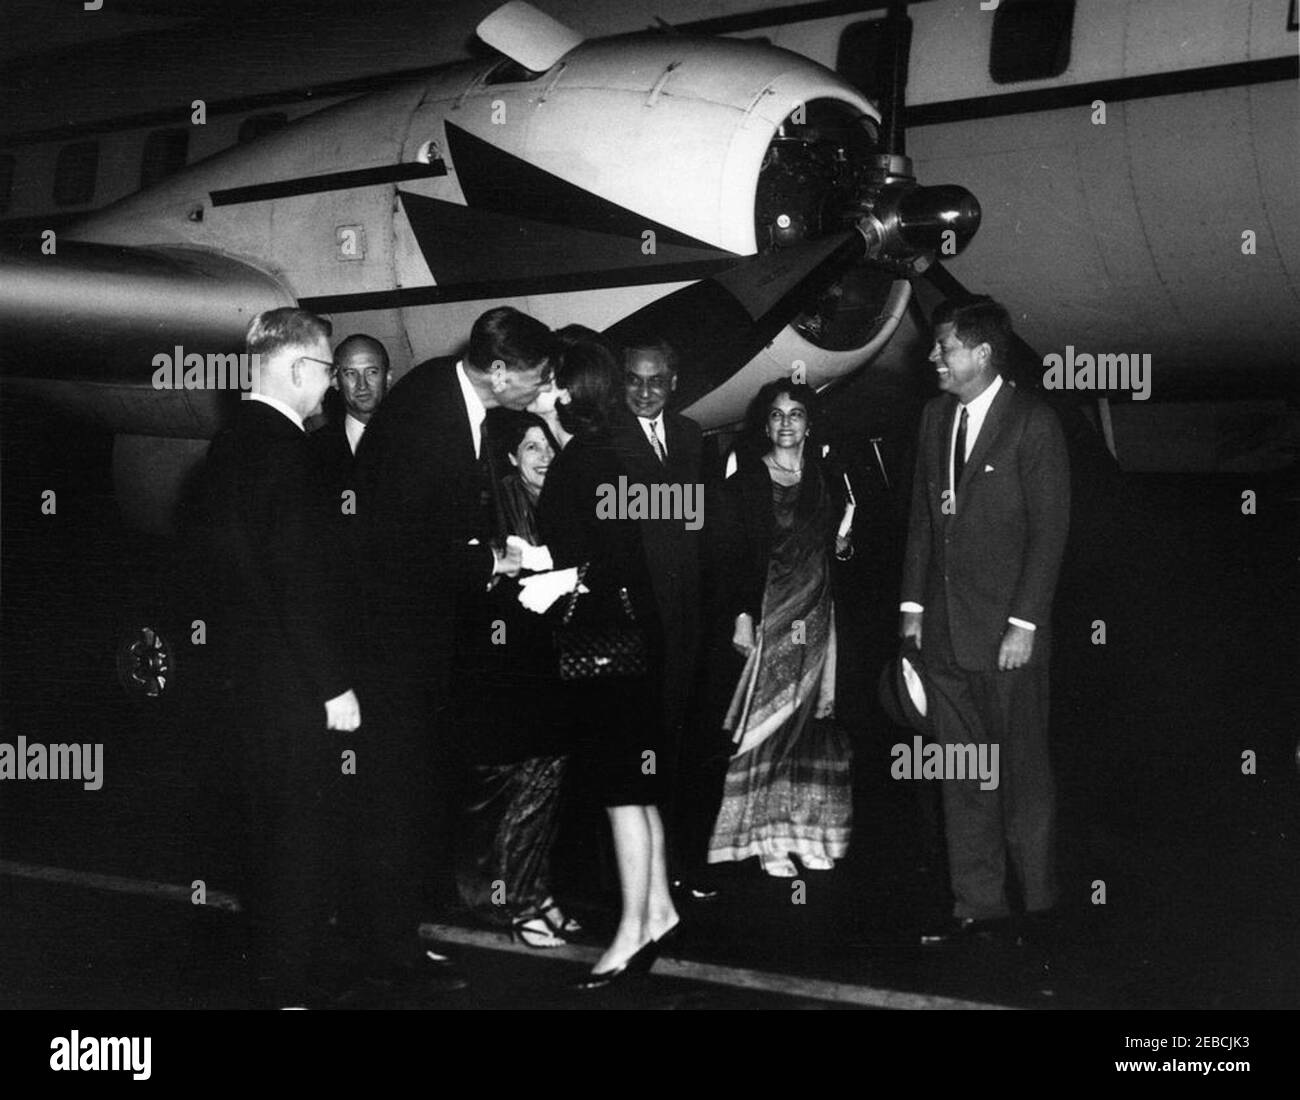 President Kennedy greets First Lady Jacqueline Kennedy (JBK) at Andrews Air Force Base upon her return from her trip to India and Pakistan, 7:25PM. United States Ambassador to India John Kenneth Galbraith kisses First Lady Jacqueline Kennedy as she returns from her trip to India and Pakistan. (L-R) Assistant Secretary of State for Near Eastern and South Asian Affairs Phillips Talbot; United State Chief of Protocol Angier Biddle Duke; Ambassador Galbraith; Shobha u201cForiu201d Nehru (wife of Braj Kumar Nehru, Ambassador to the United States from India); the First Lady; Ambassador Nehru; Sher Stock Photo